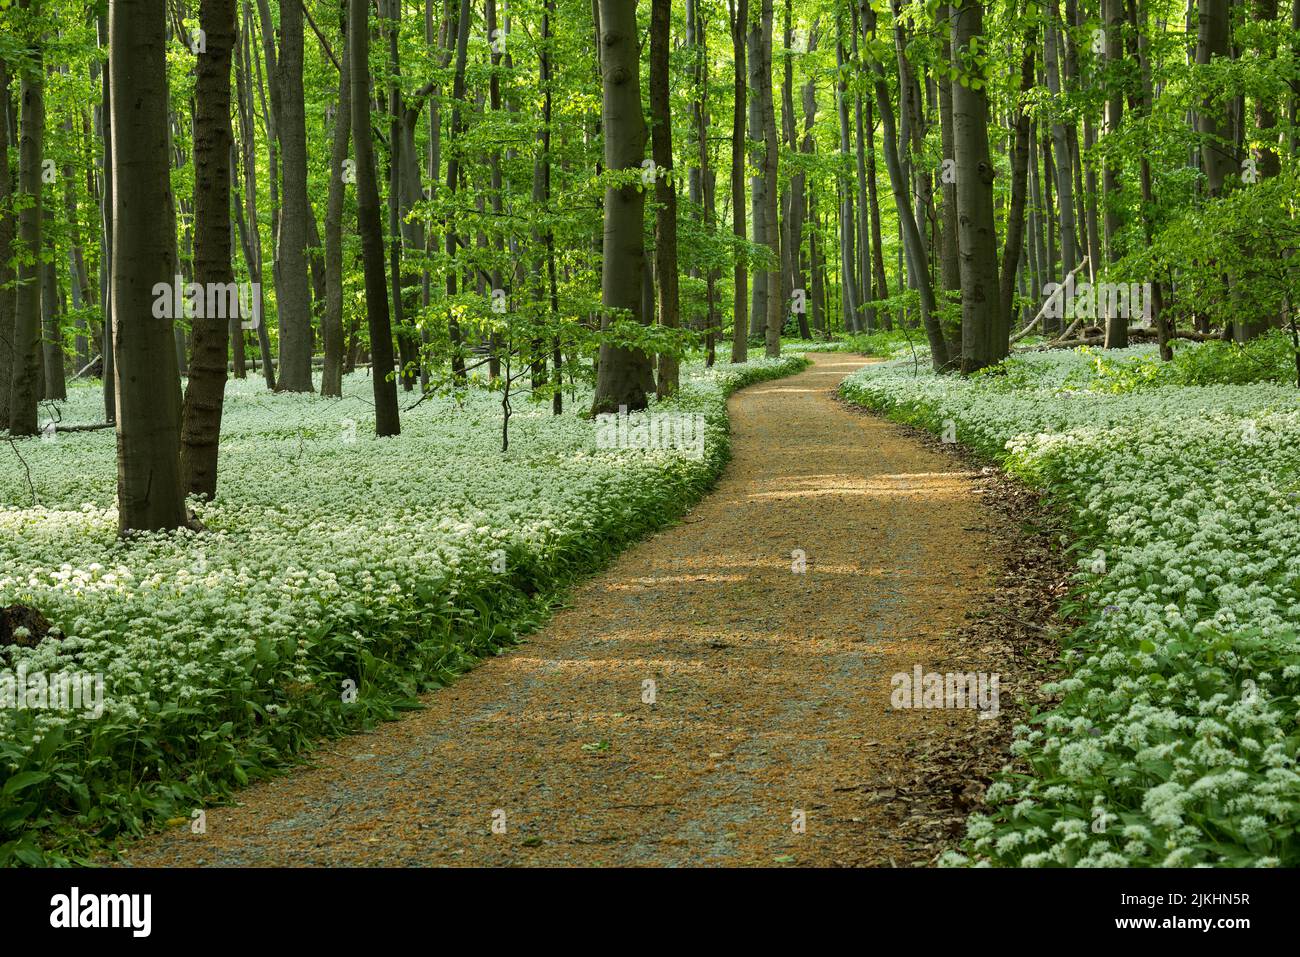 Path through spring green beech forest, a carpet of wild garlic flowers covers the forest floor, Hainich National Park, UNESCO World Natural Heritage Site Ancient Beech Forests, Germany, Thuringia Stock Photo